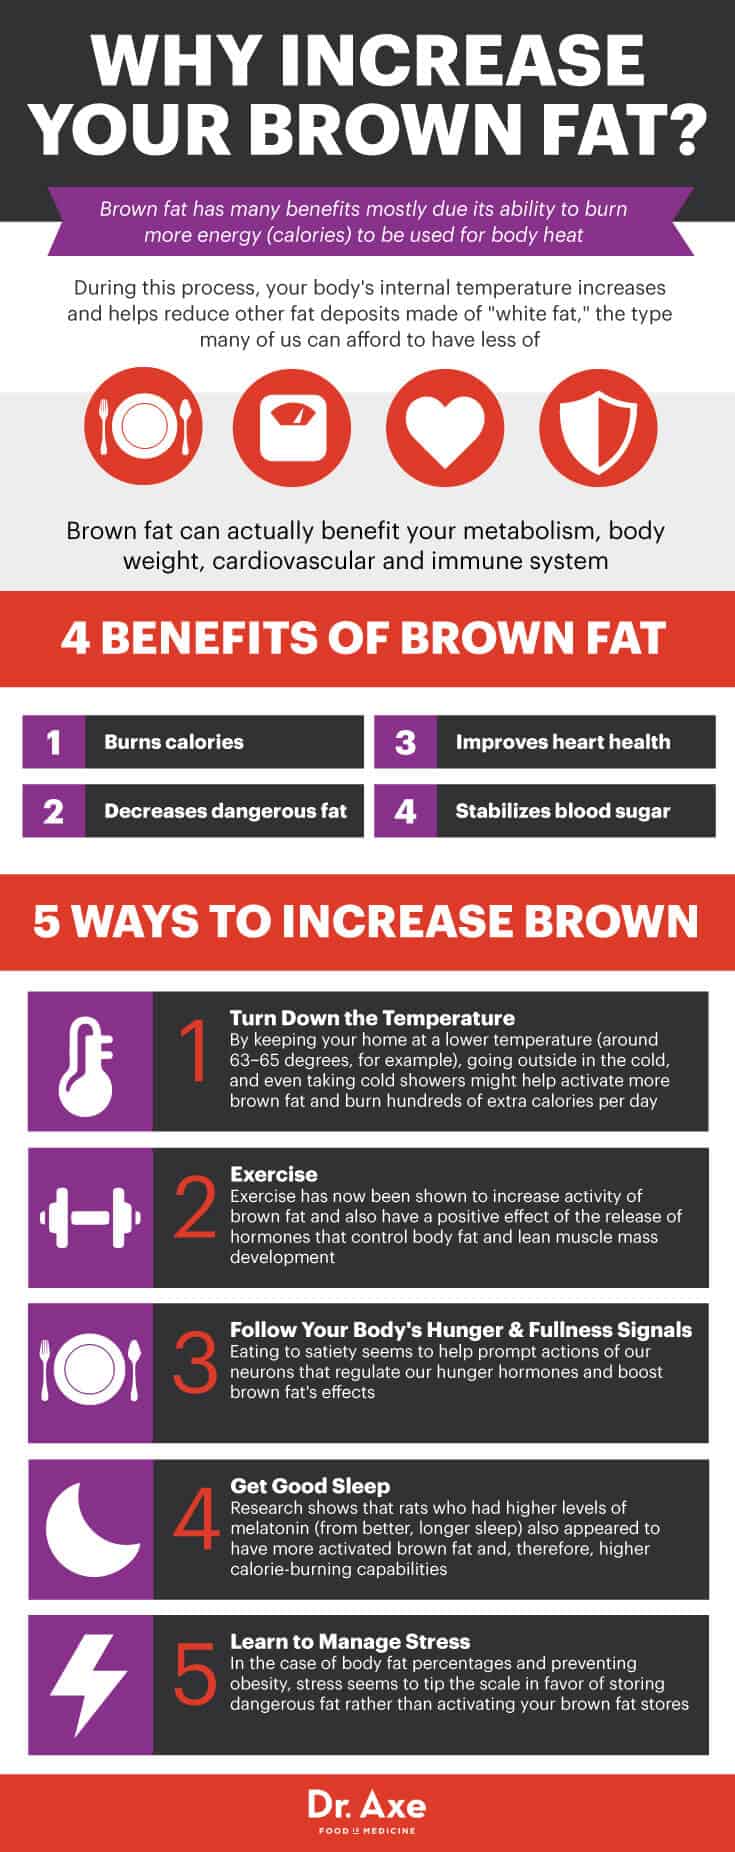 Brown fat benefits - Dr. Axe